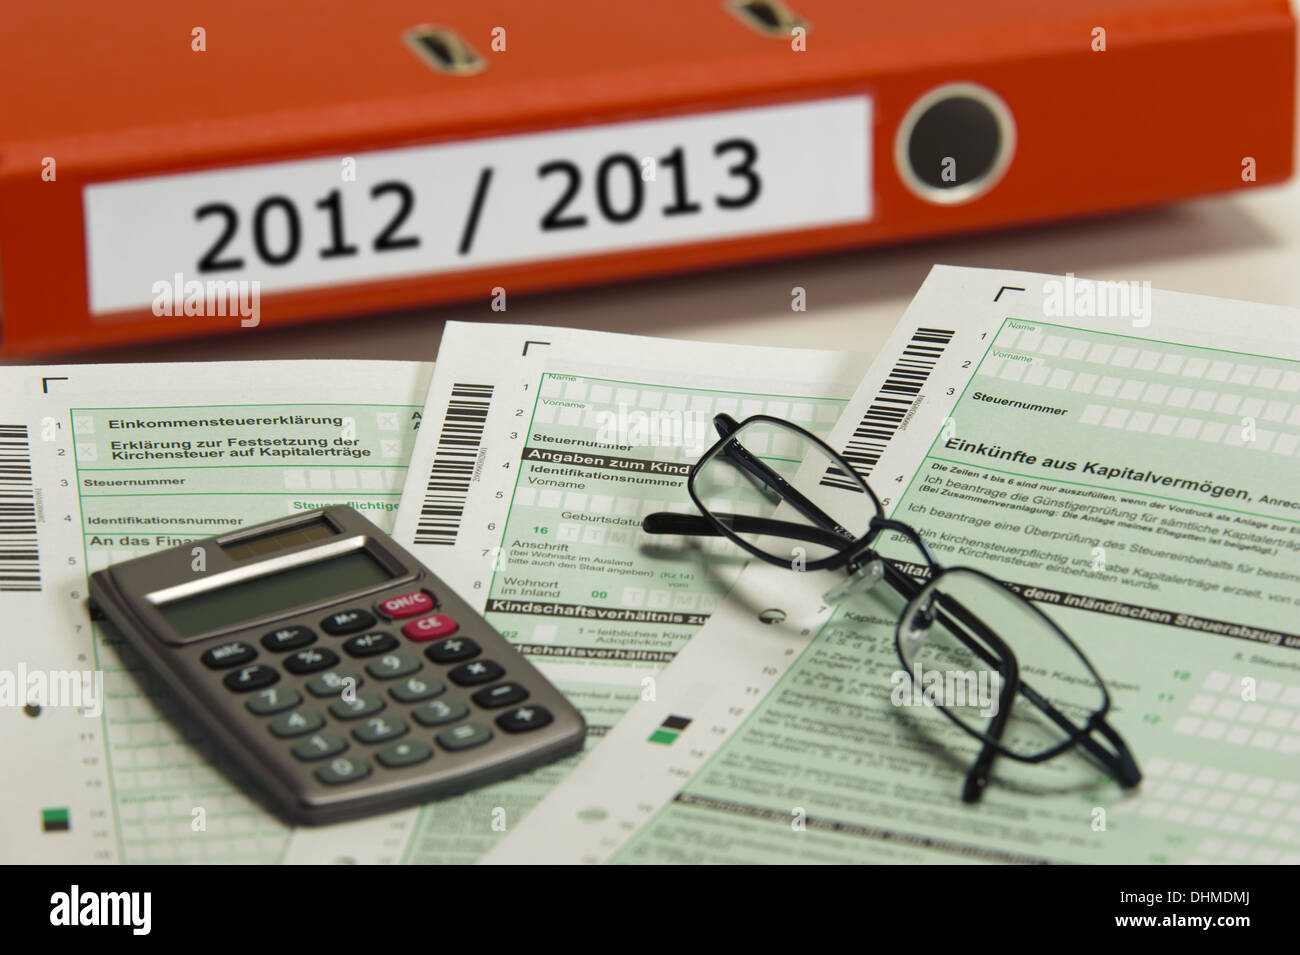 german tax form for 2012 / 2013 Stock Photo